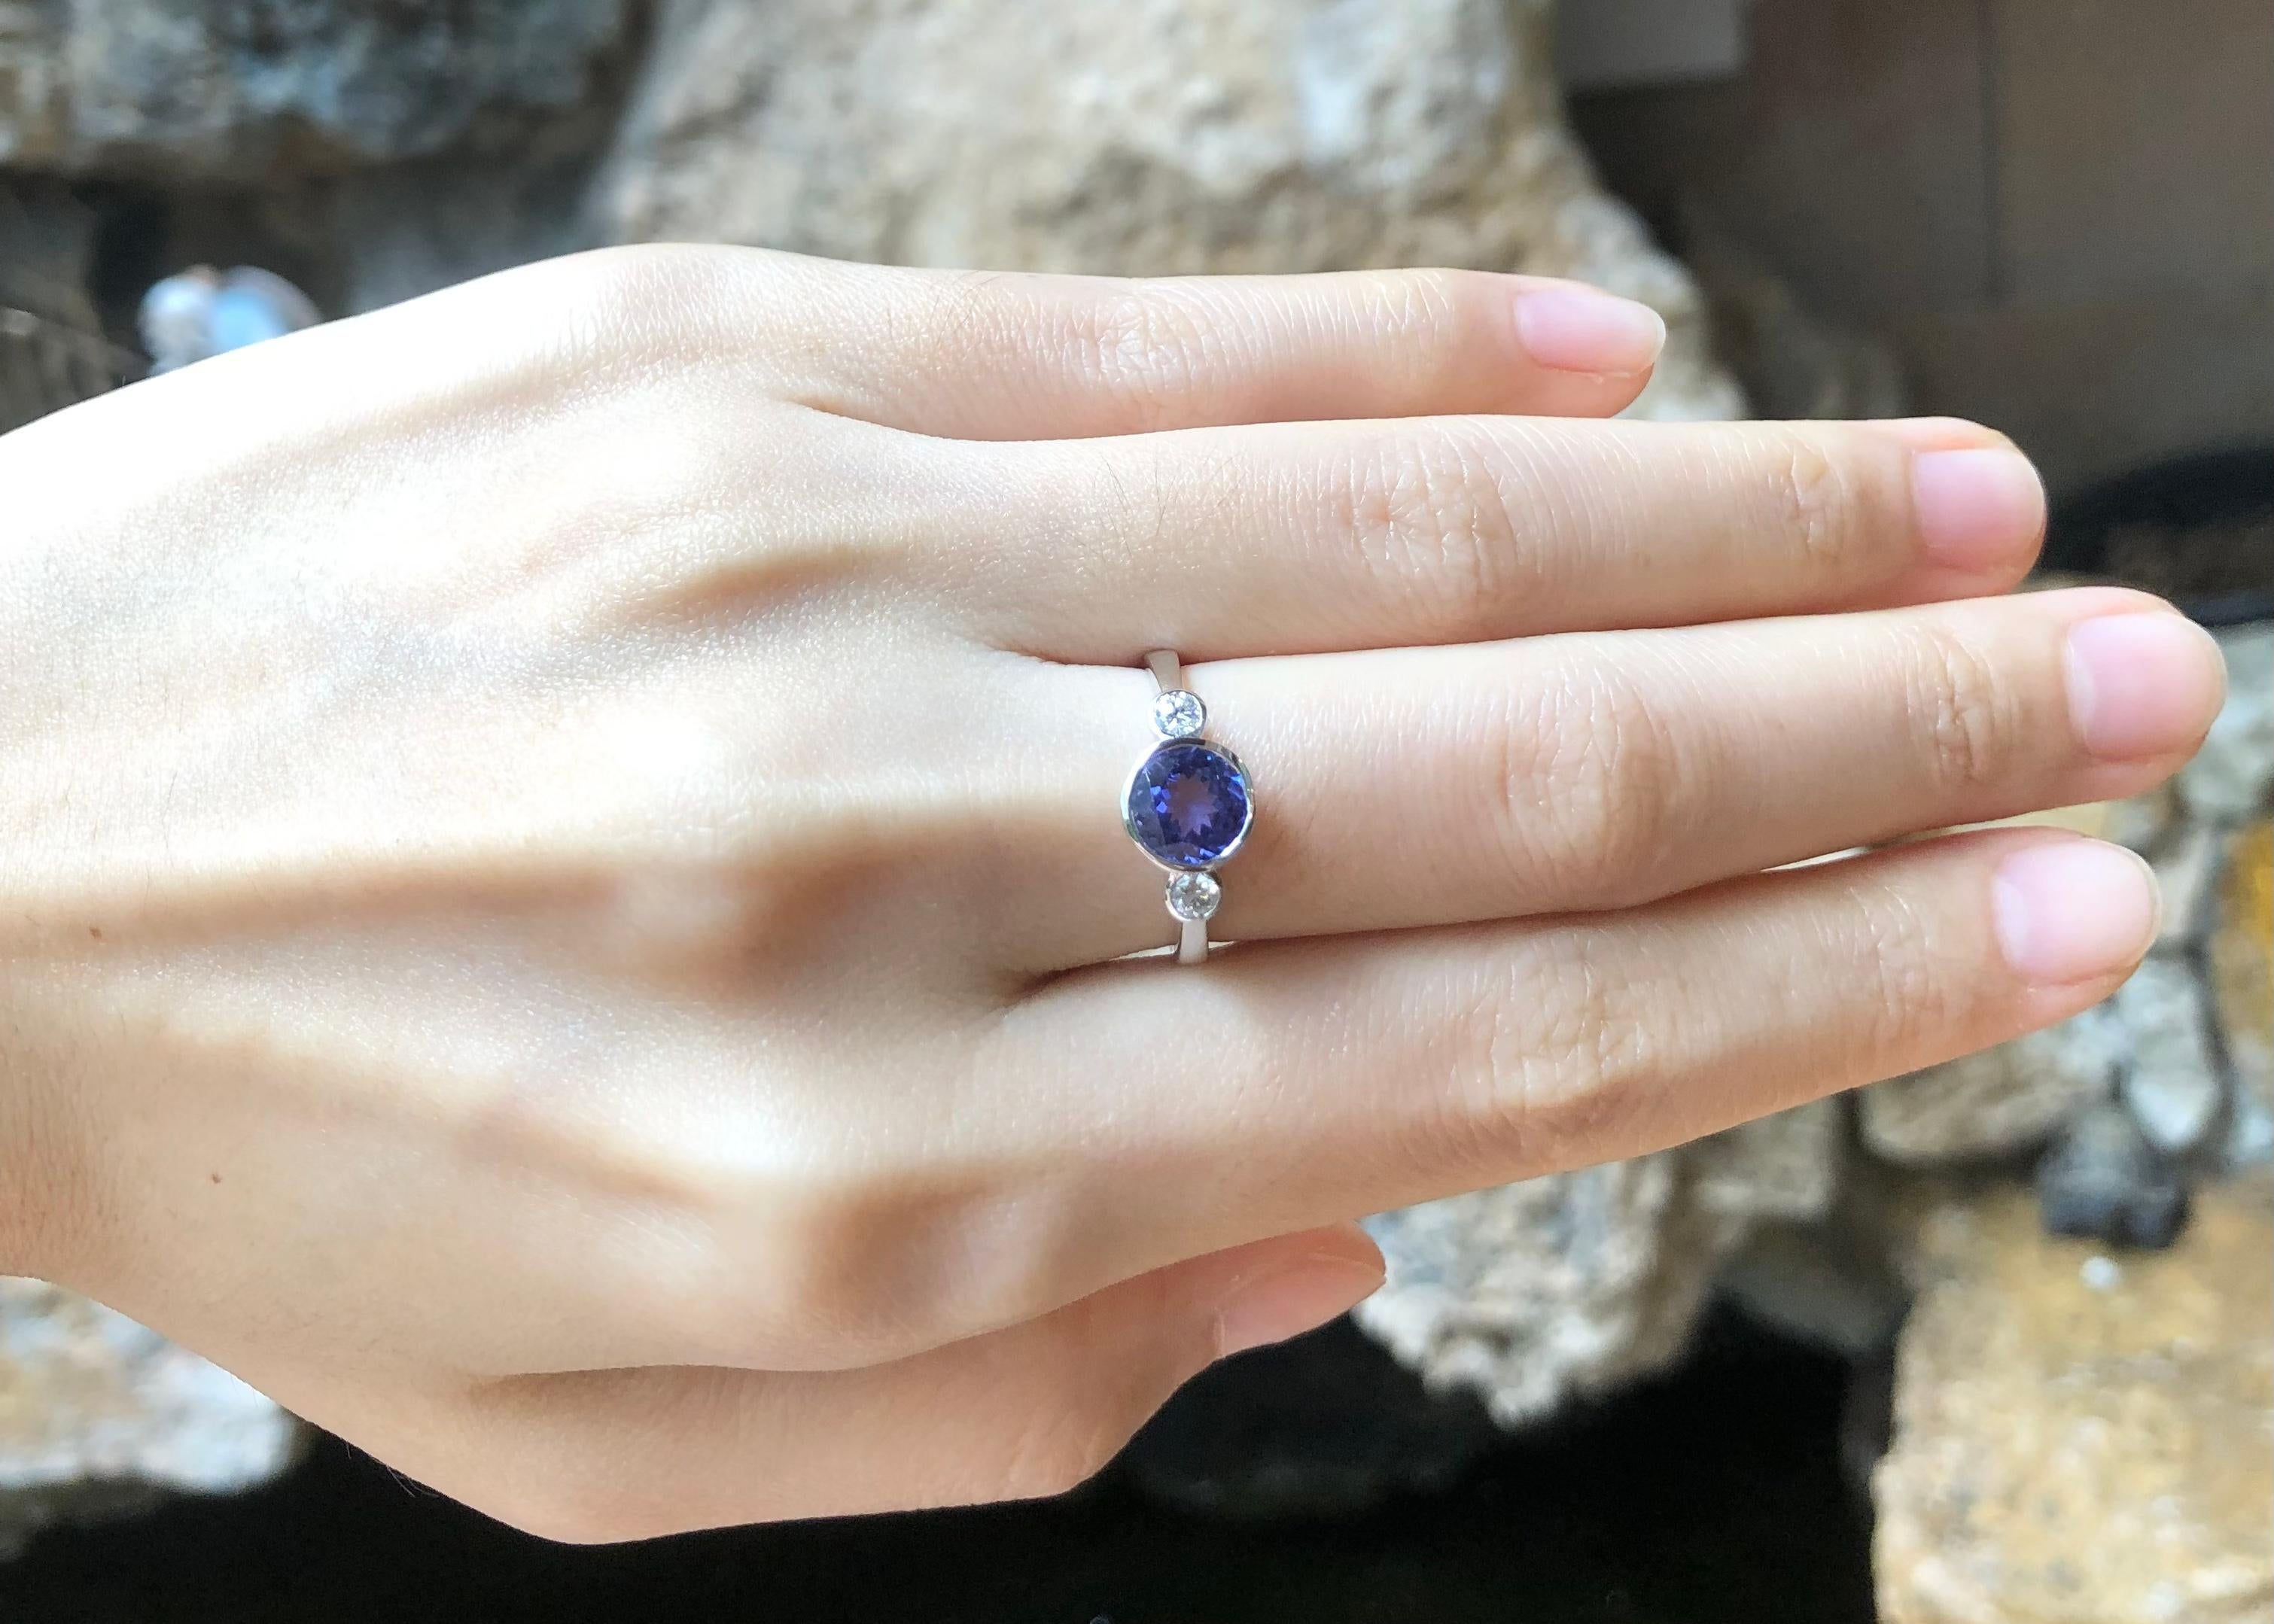 Tanzanite 1.48 carats with Diamond 0.17 carat Ring set in 18K White Gold Settings

Width:  1.3 cm 
Length: 0.8 cm
Ring Size: 51
Total Weight: 3.10 grams

